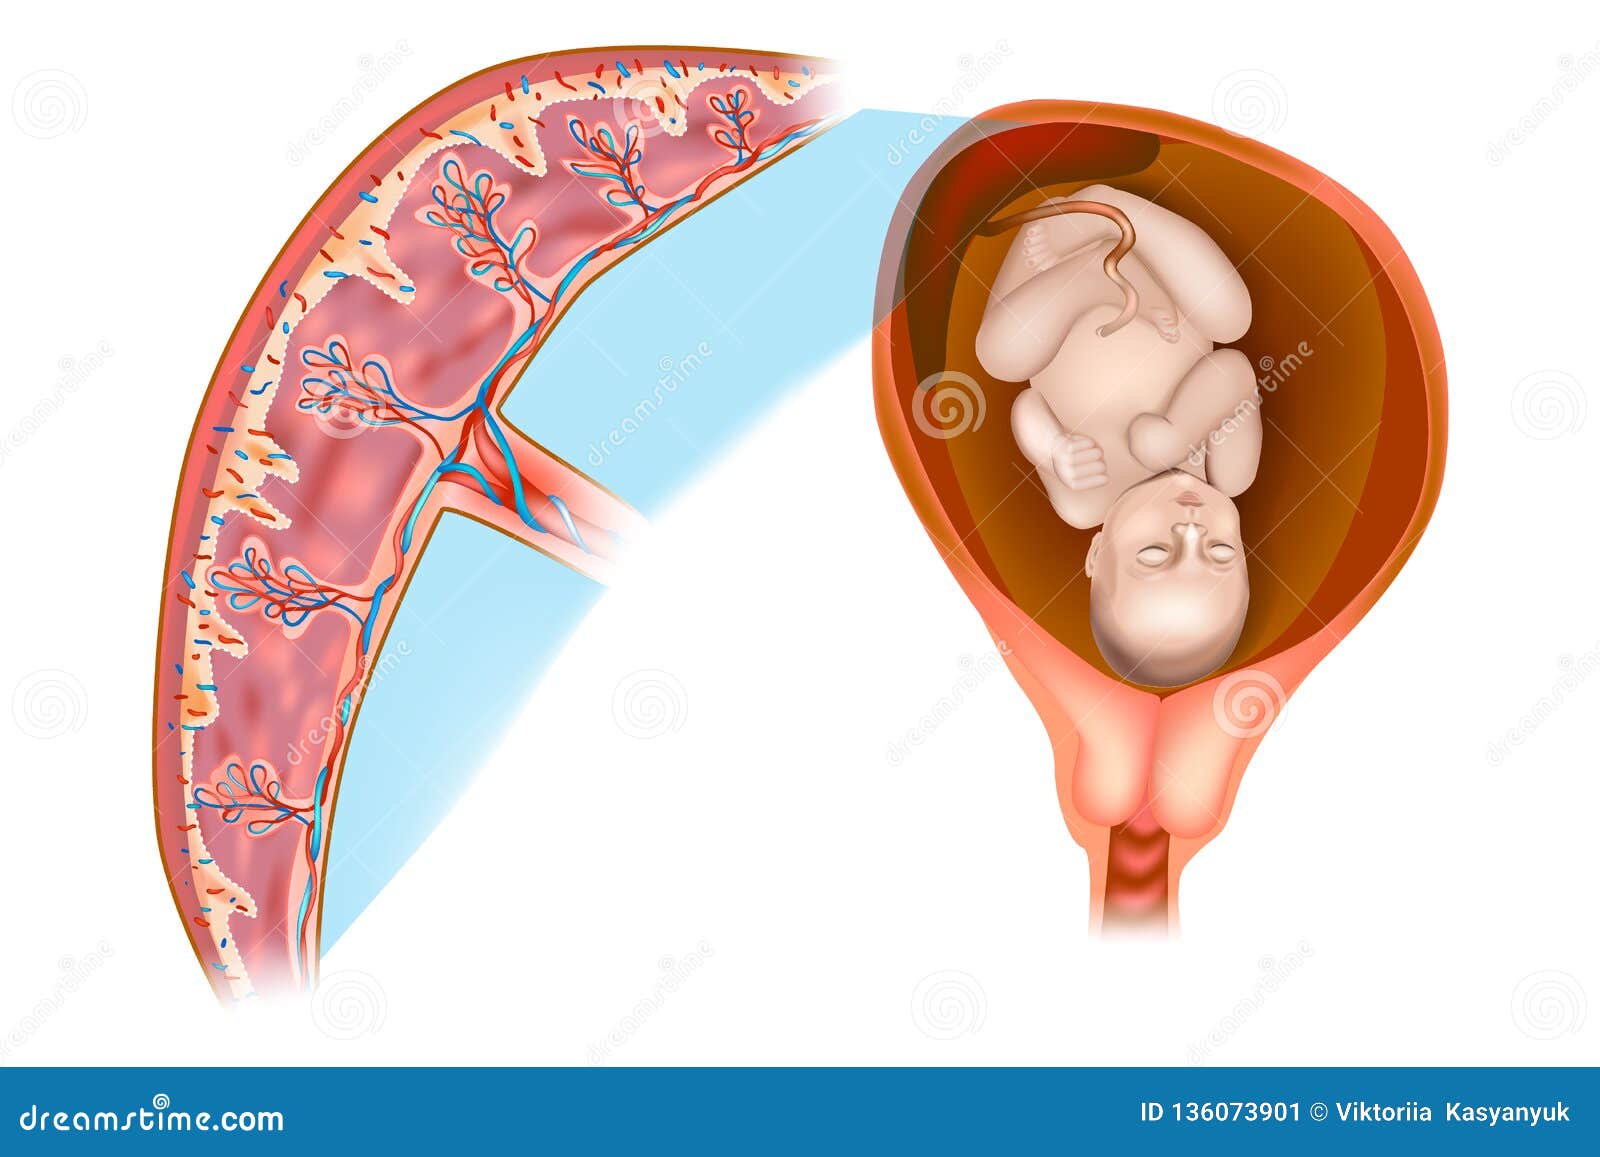 placental structure and circulation.